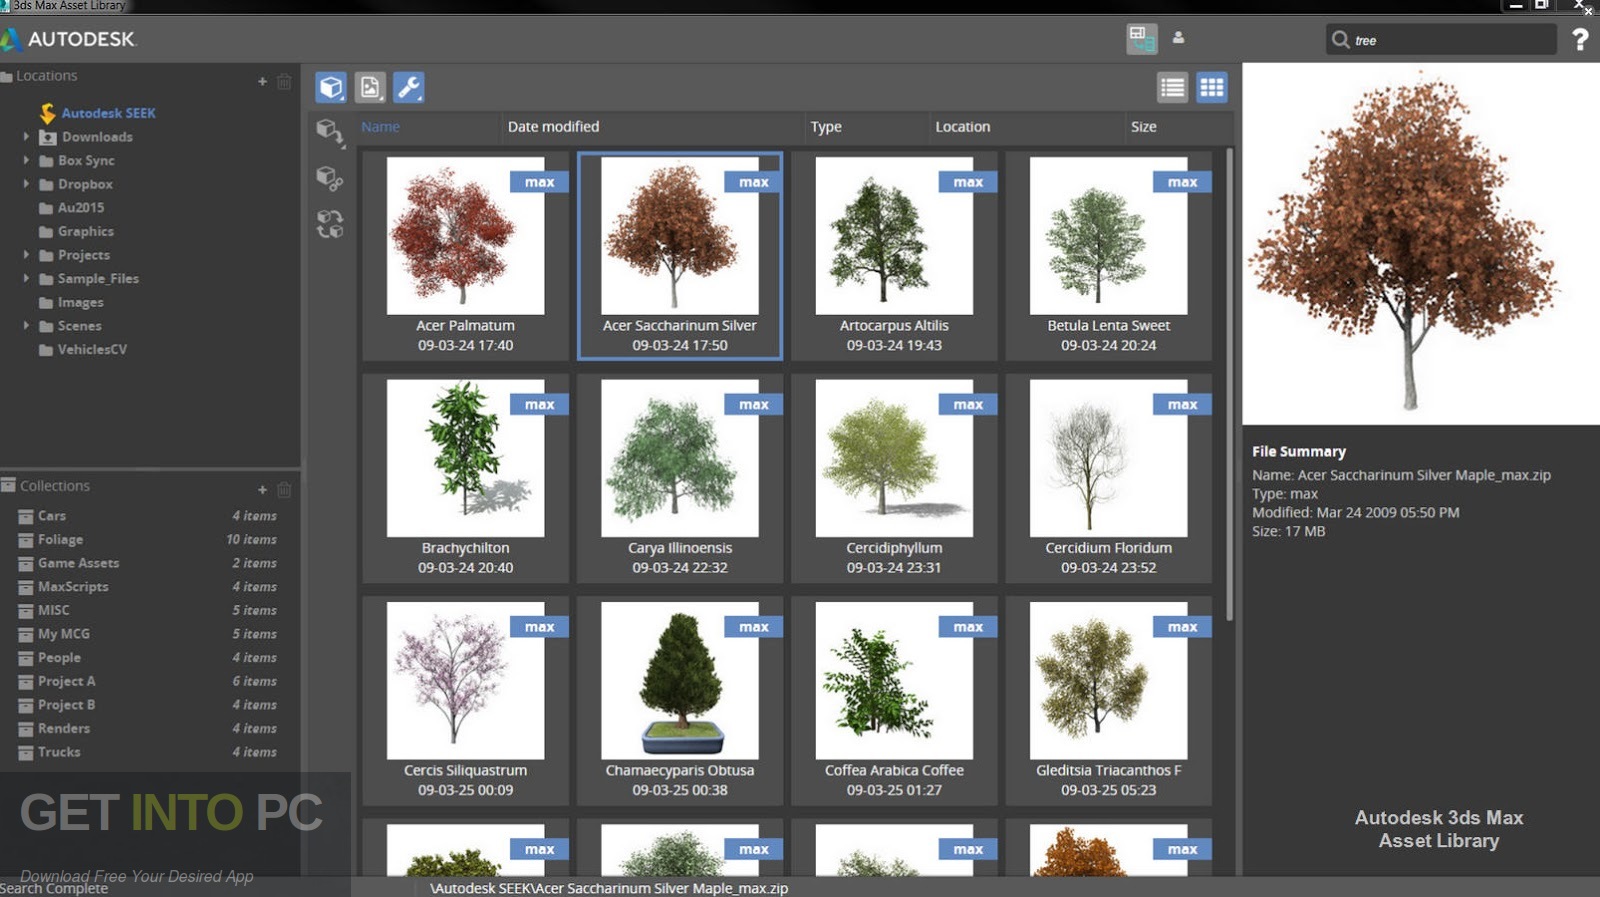 vray software free download for 3ds max 2015